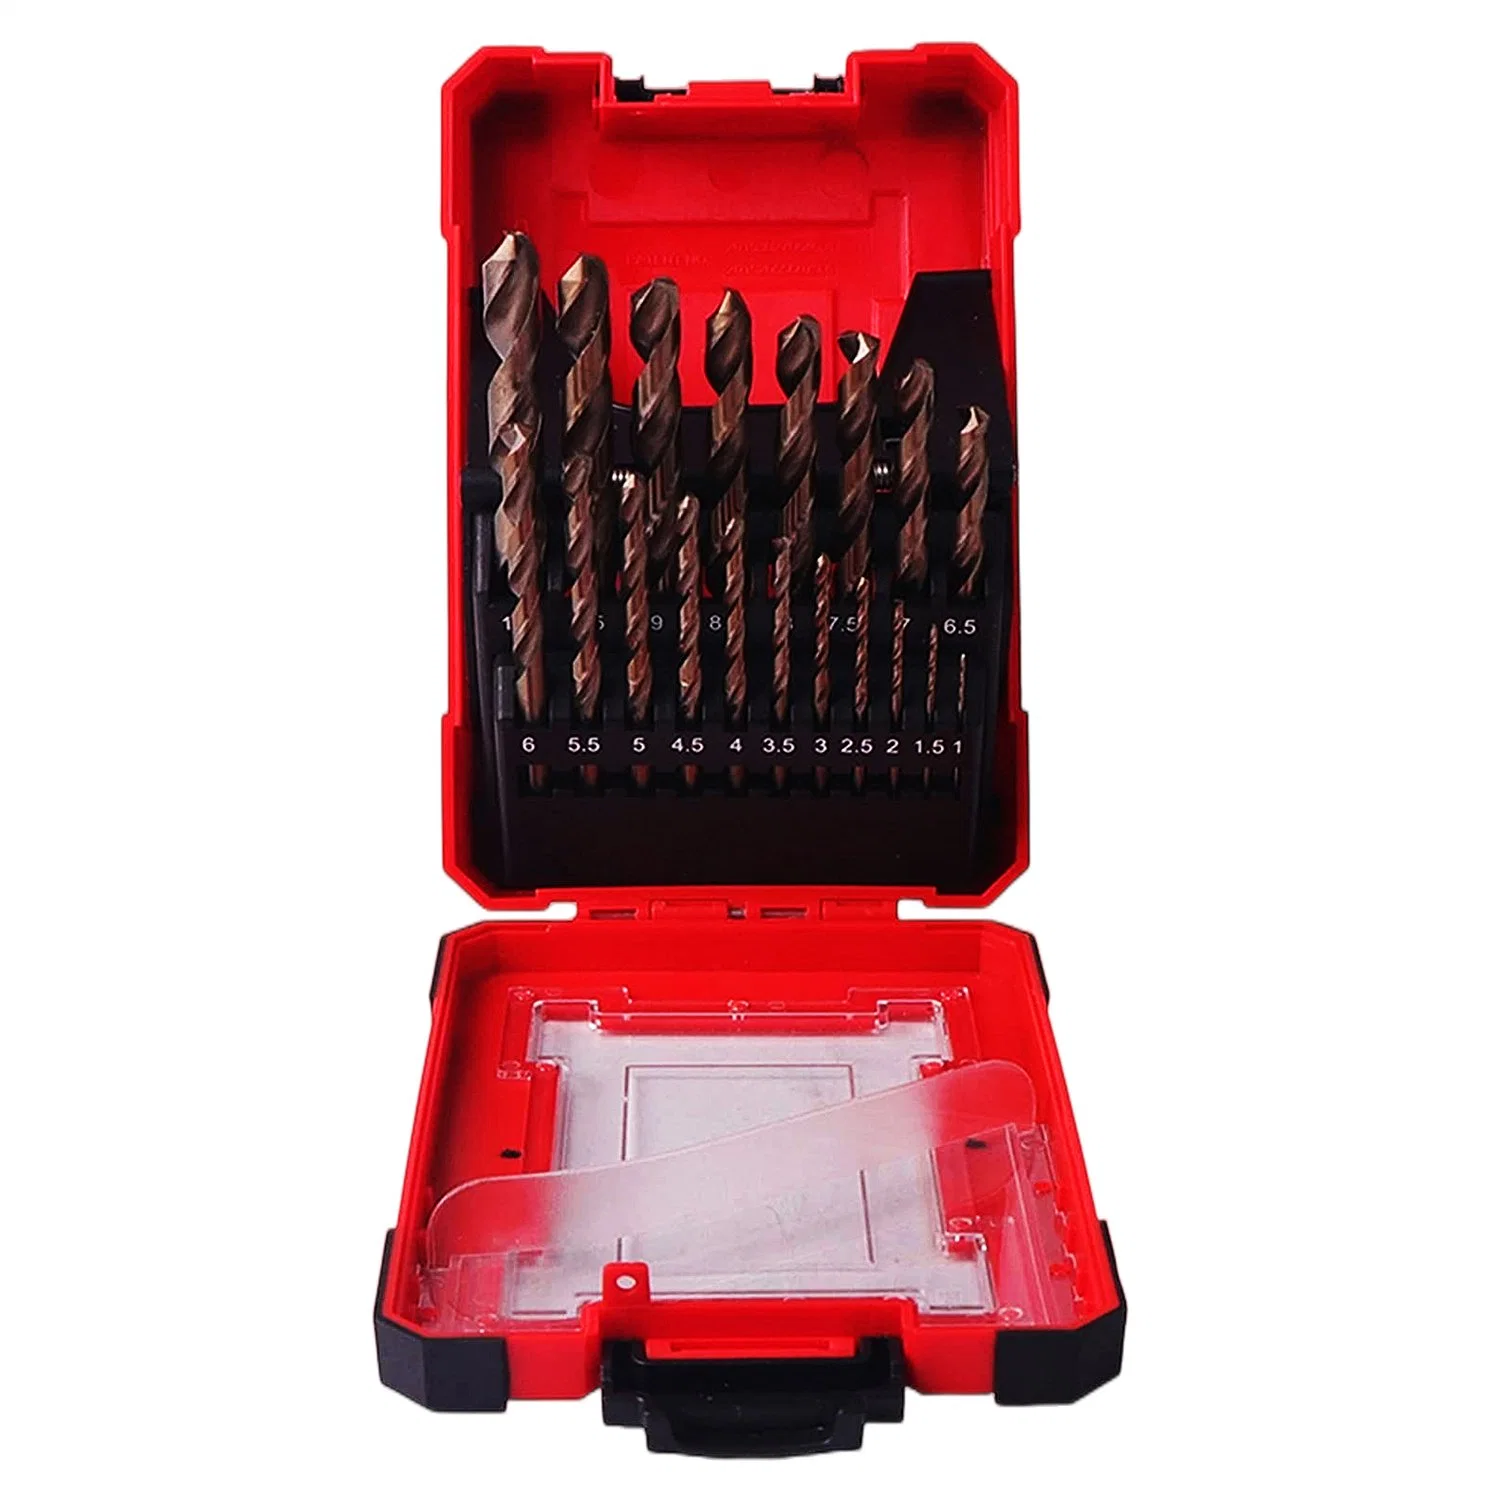 25PC M42 Cobalt Drill Bits Set for Stainless Steel Drilling Bits Power Tools Accessories Step Bits for Metal